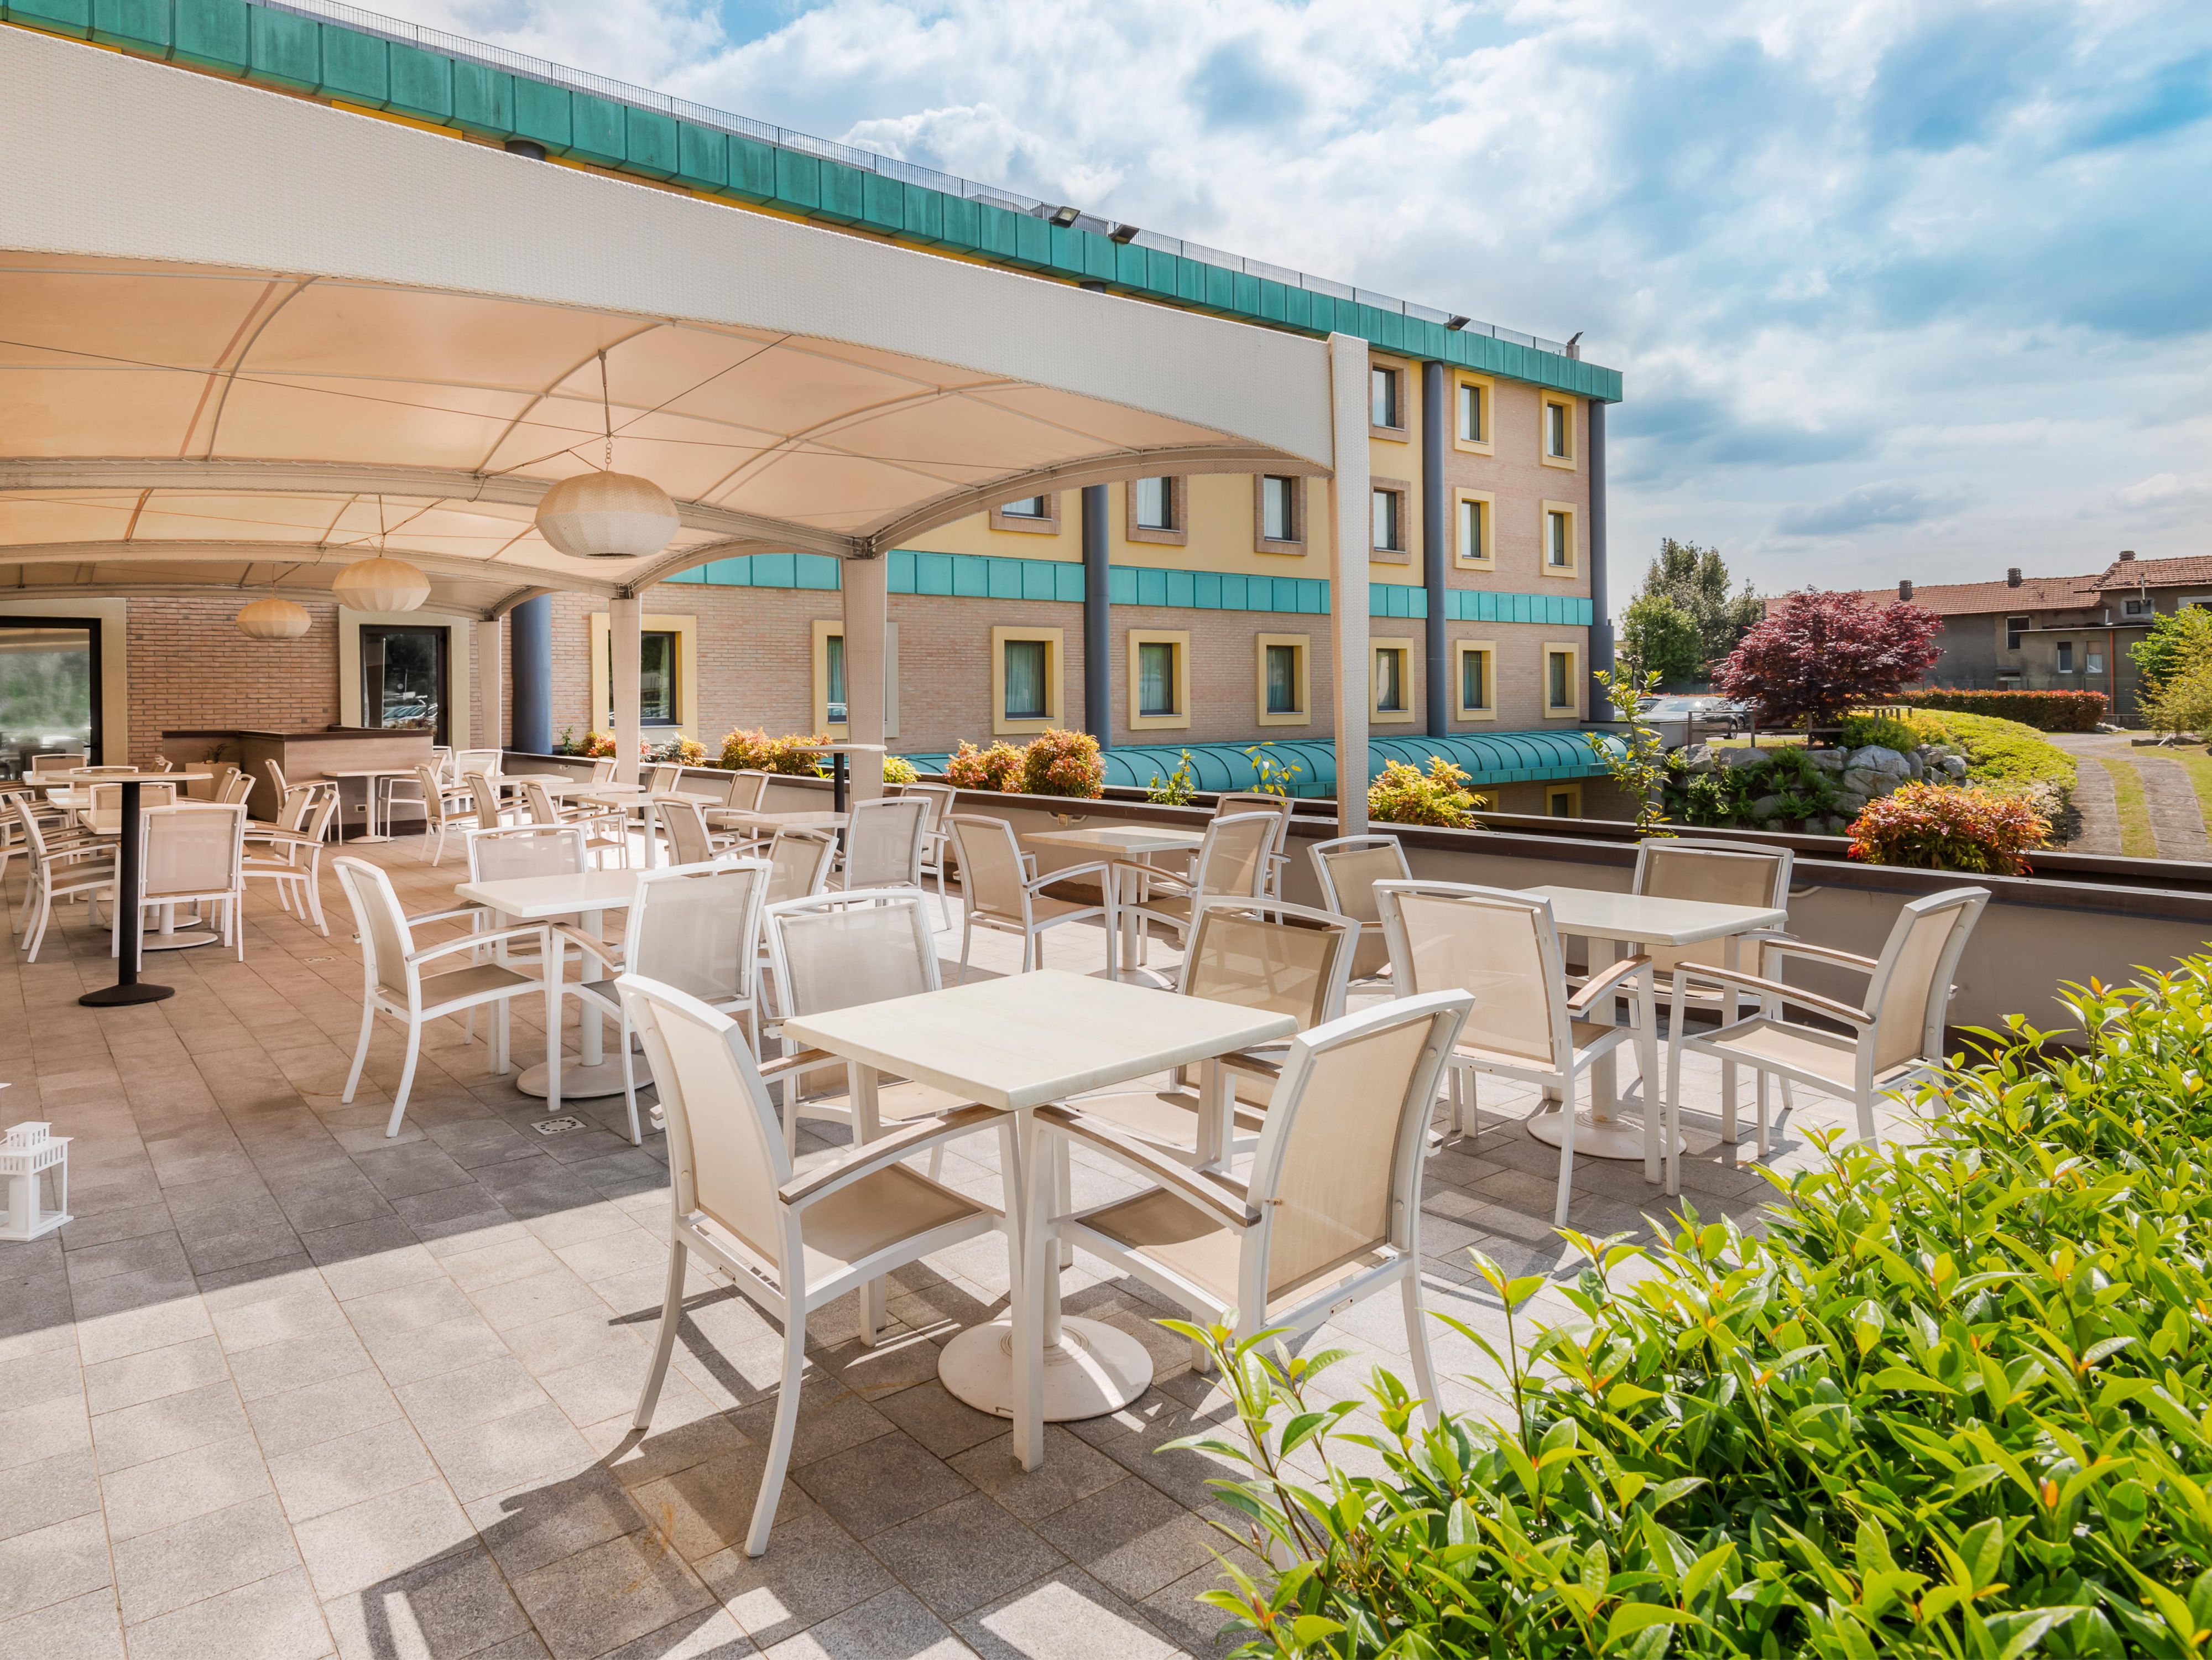 Our internal restaurant, La Brughiera, is open every day for lunch and dinner. During summer season, it is possible to eat under the terrace gazebo. Enjoy our daily lunch menus or our à la carte menu for dinner.